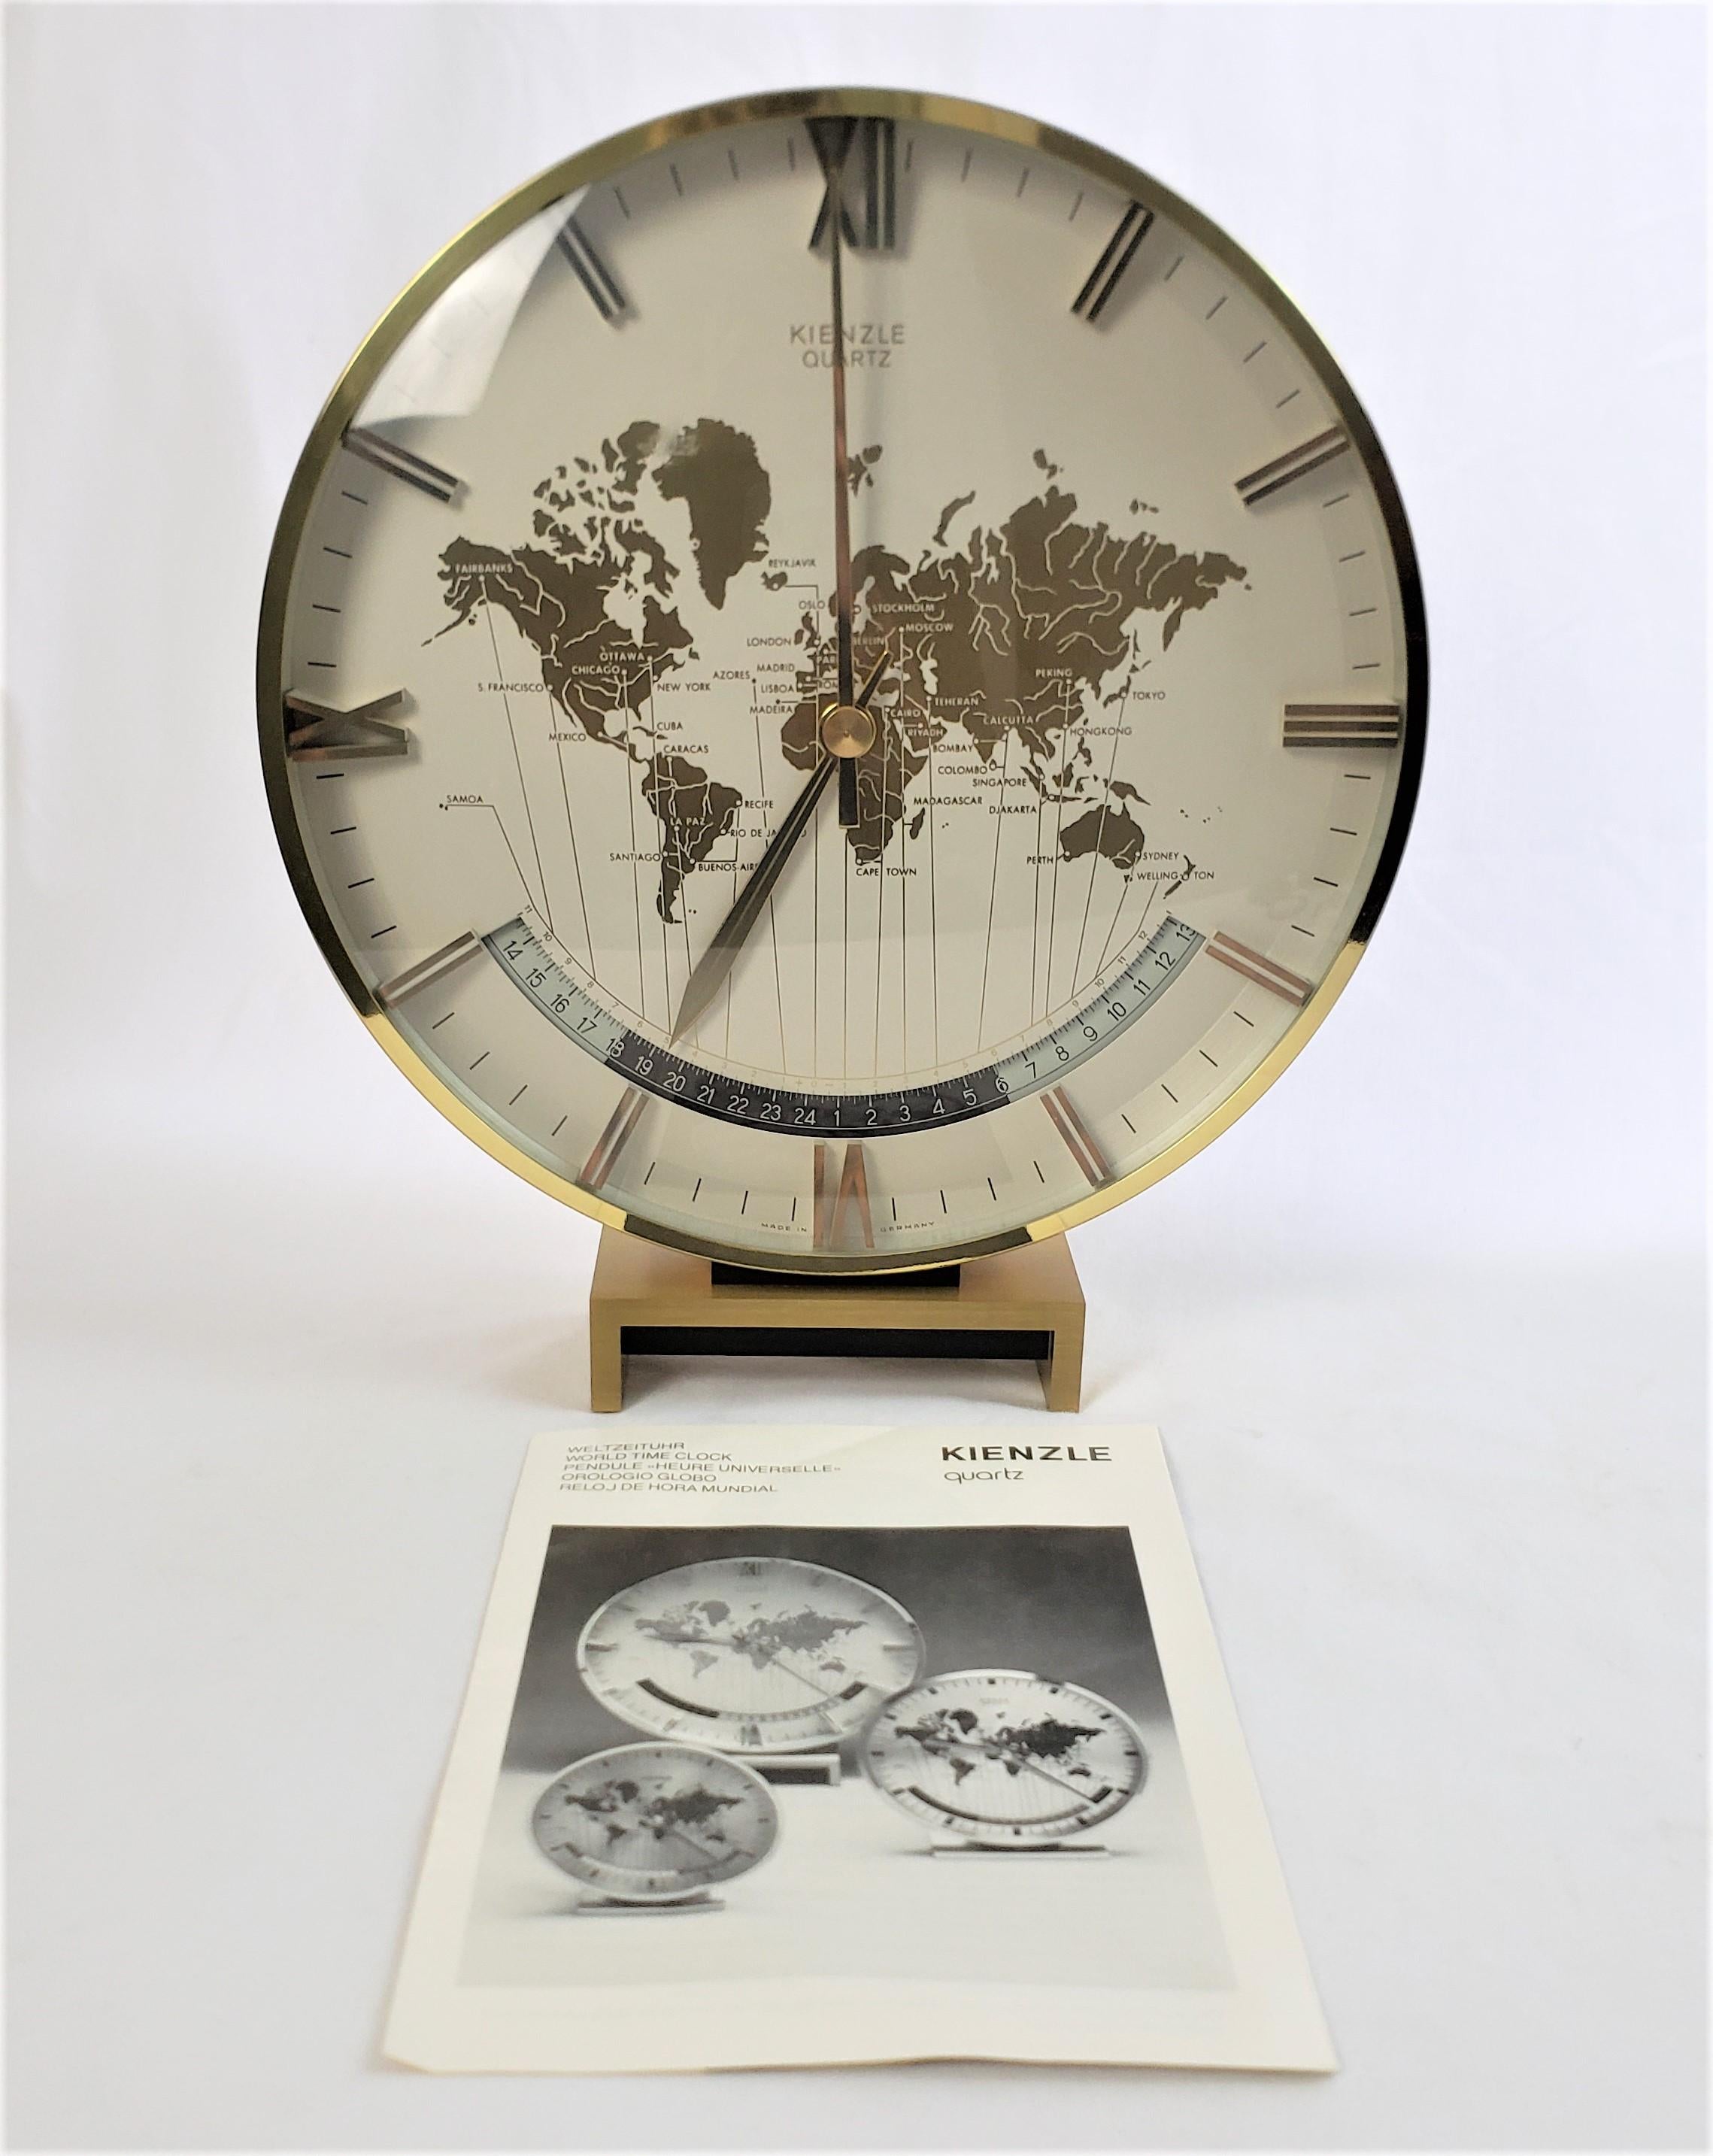 This large table or desk clock was made by the well known Kienzle clock company of Germany and dates to approximately 1970 and done in a Mid Century Modern style. The clock case is composed of heavy polished brass which accents the World map on the